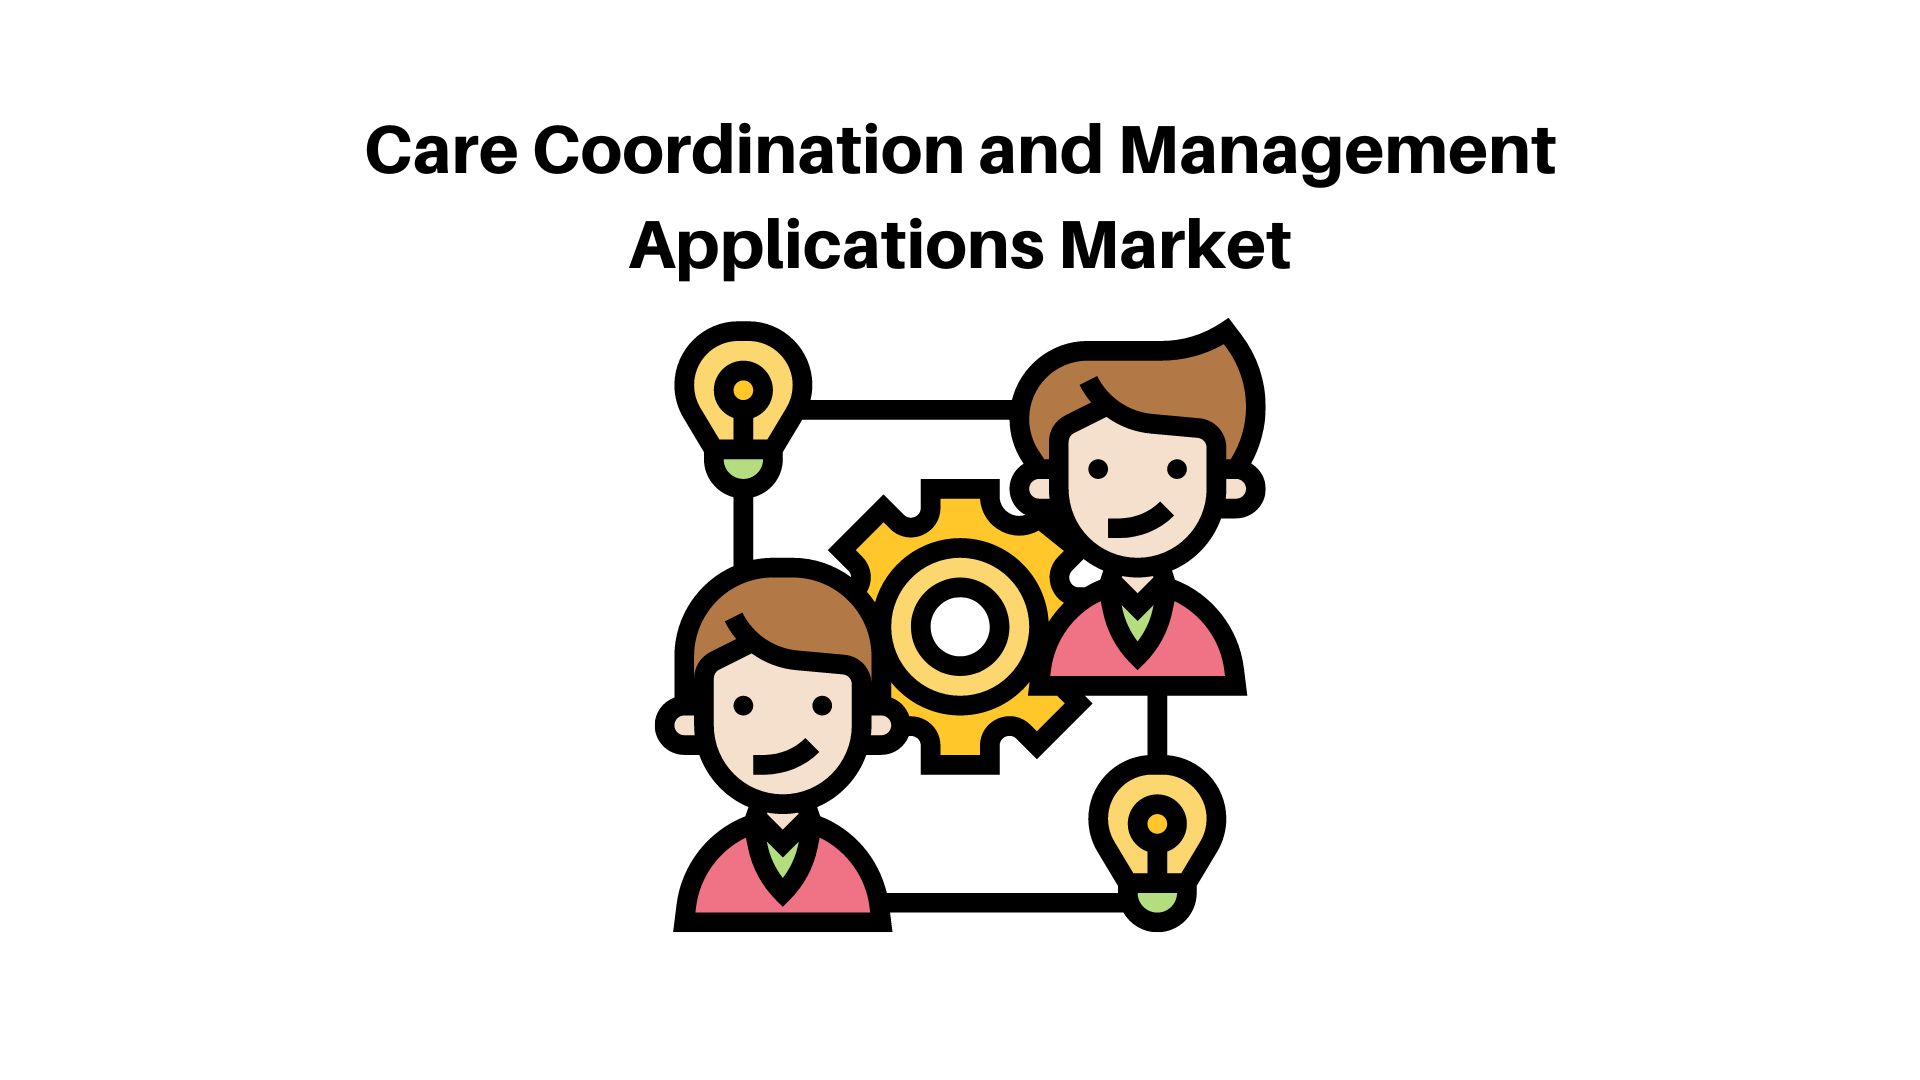 Care Coordination and Management Applications Market To Cross USD 20.1 Billion By 2032